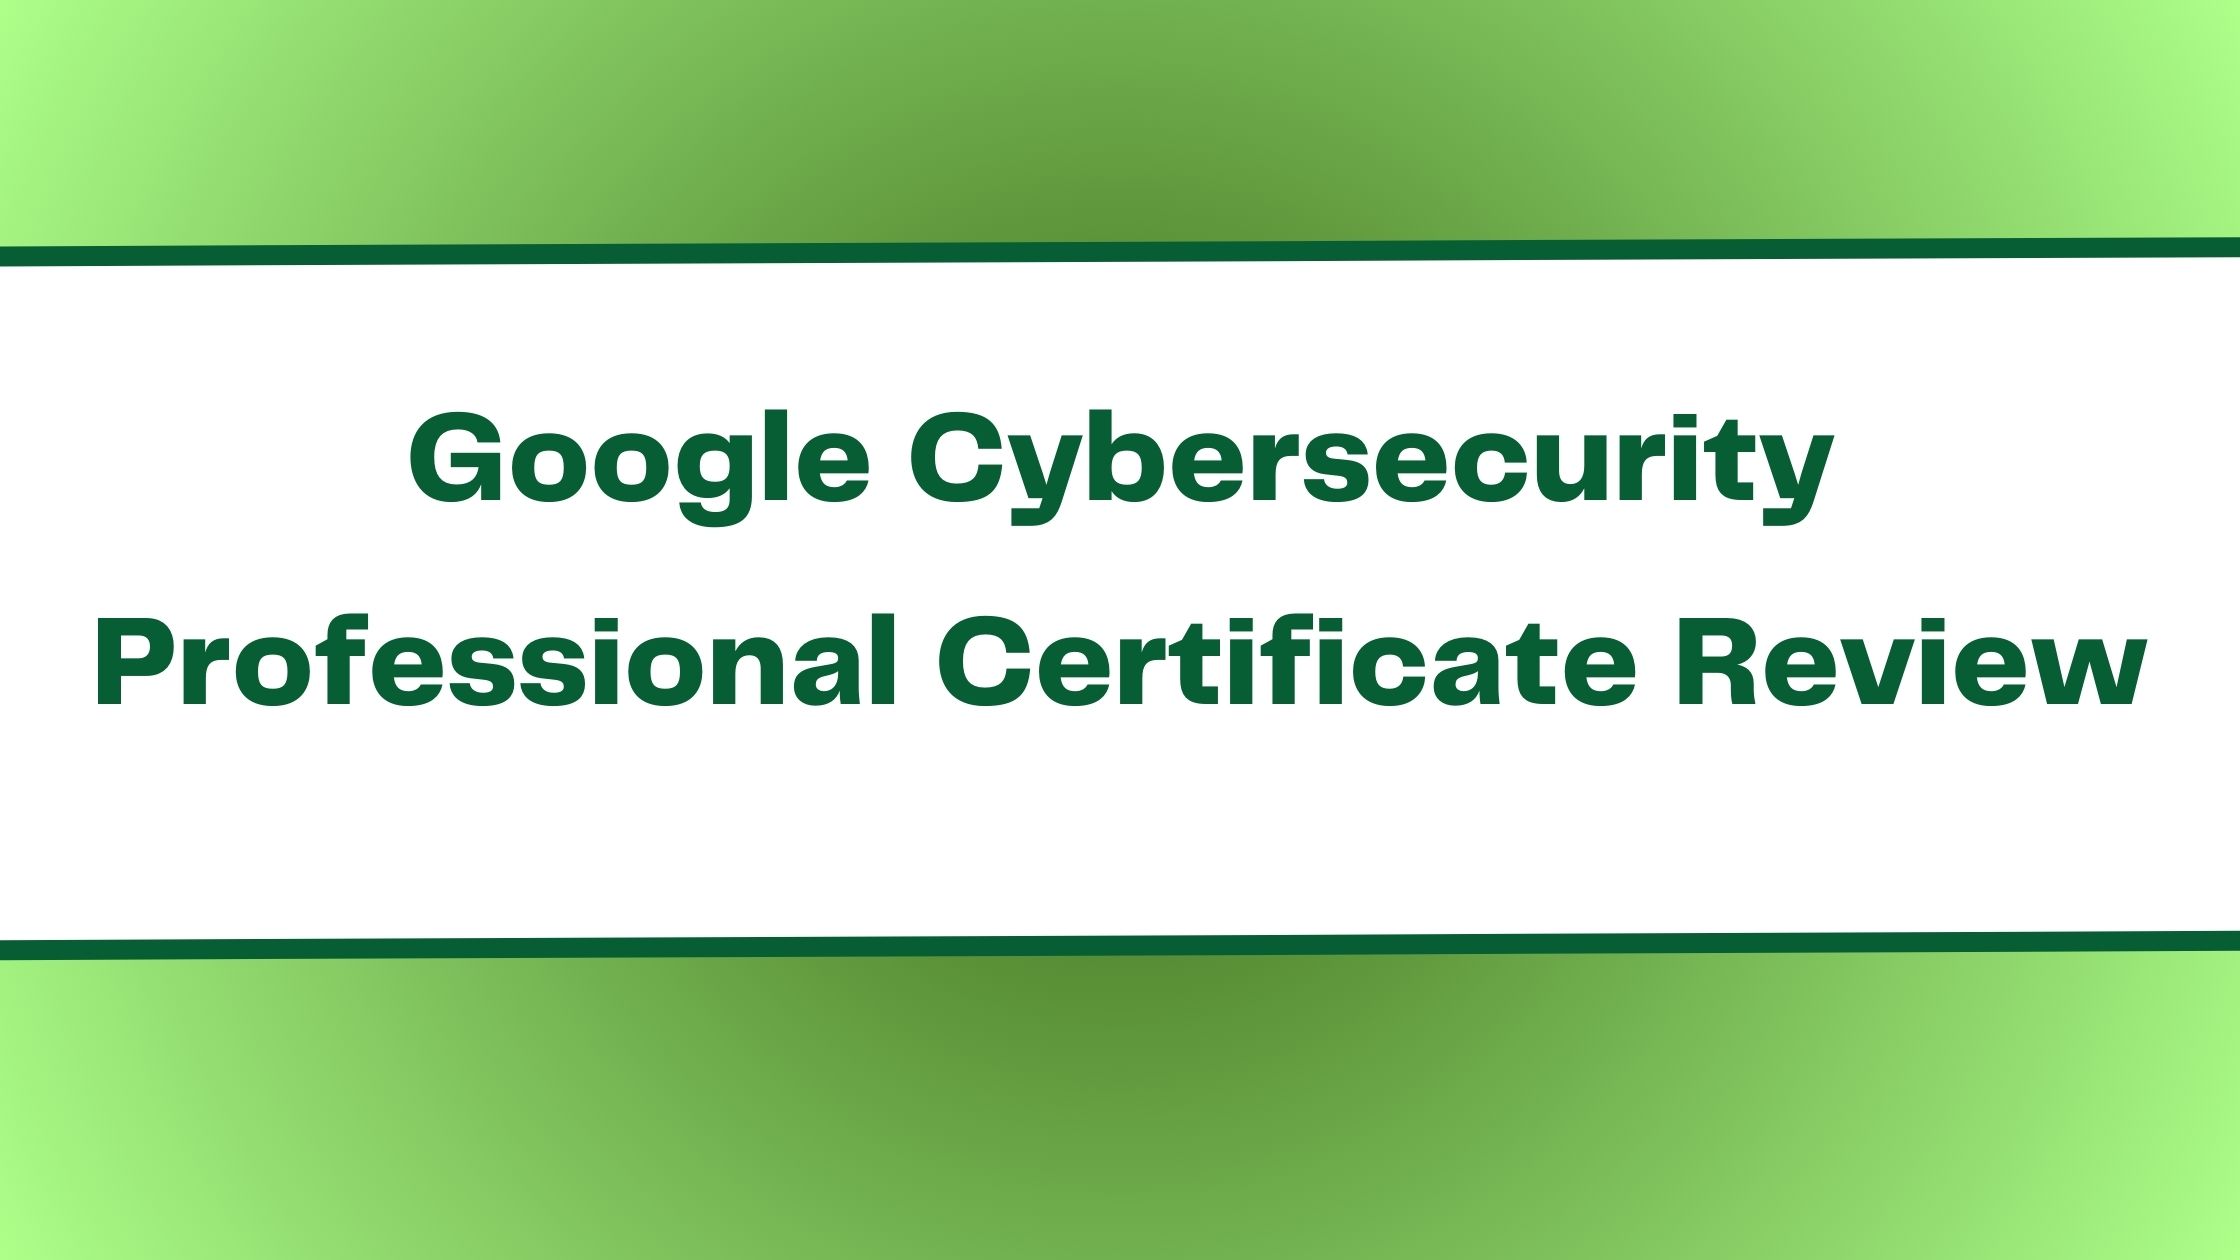 Google Cybersecurity Professional Certificate Review Is It Worth It?